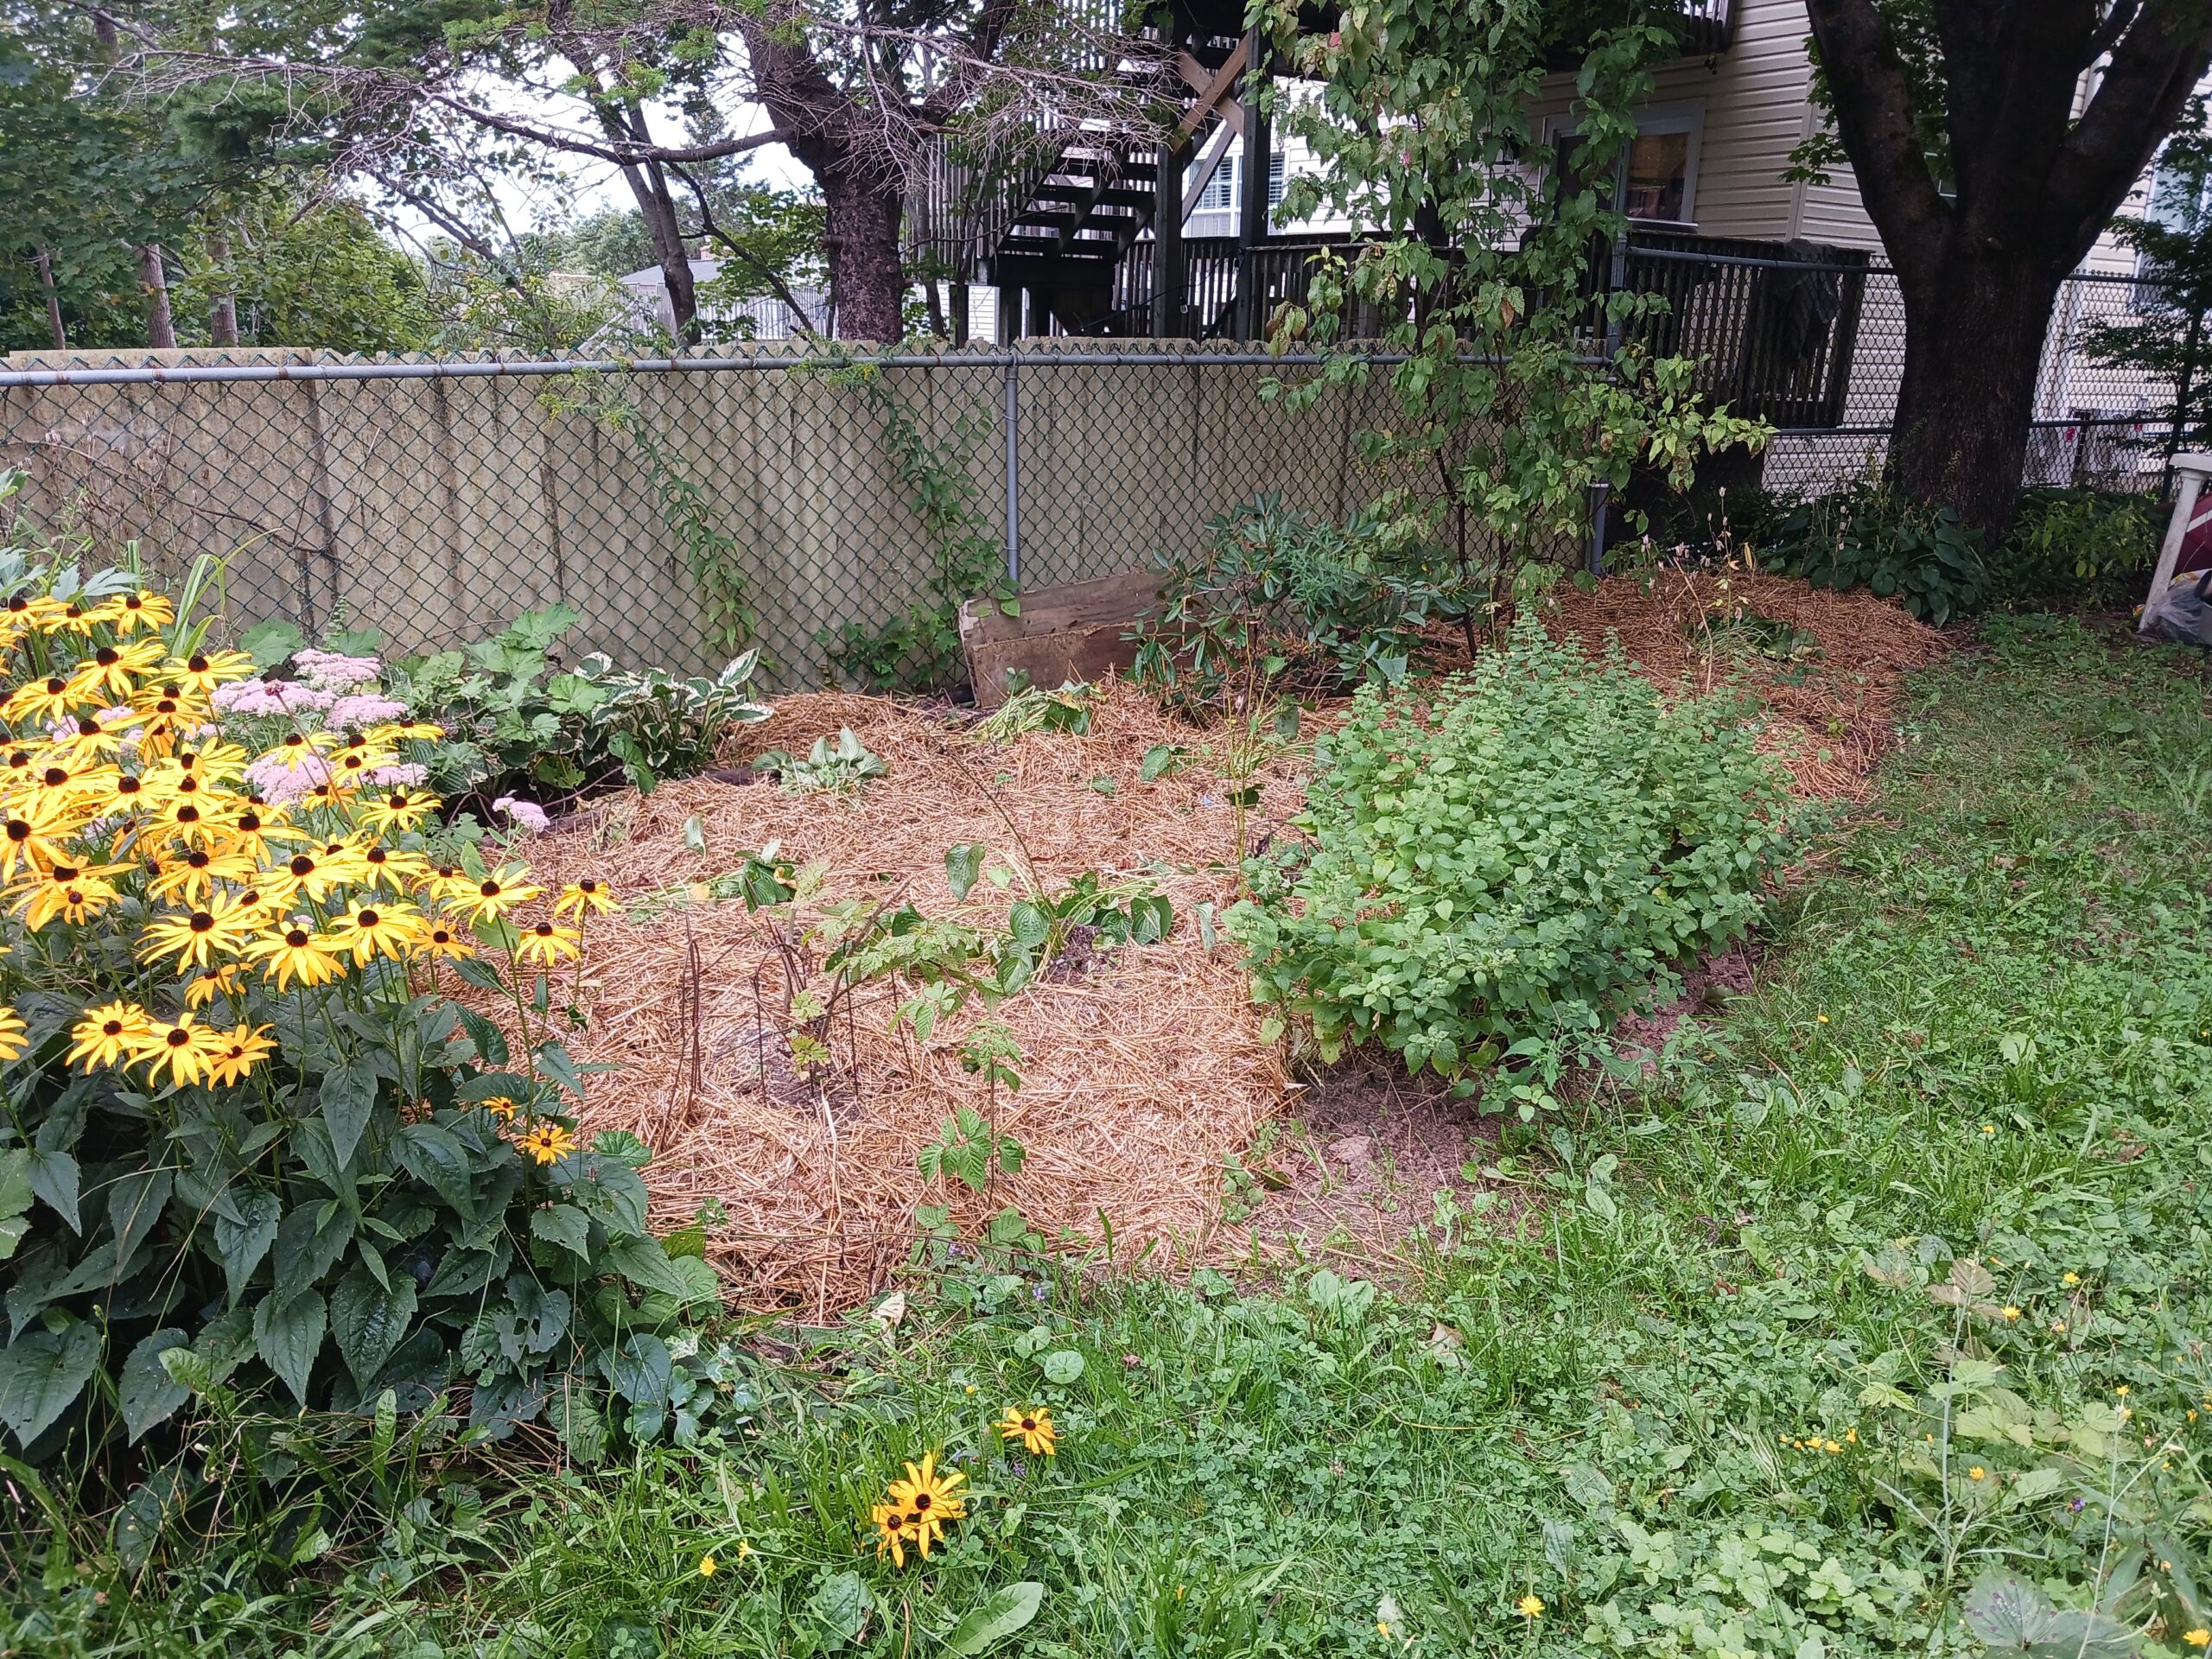 Brown eyed susans in a border. The future site of pawpaw trees